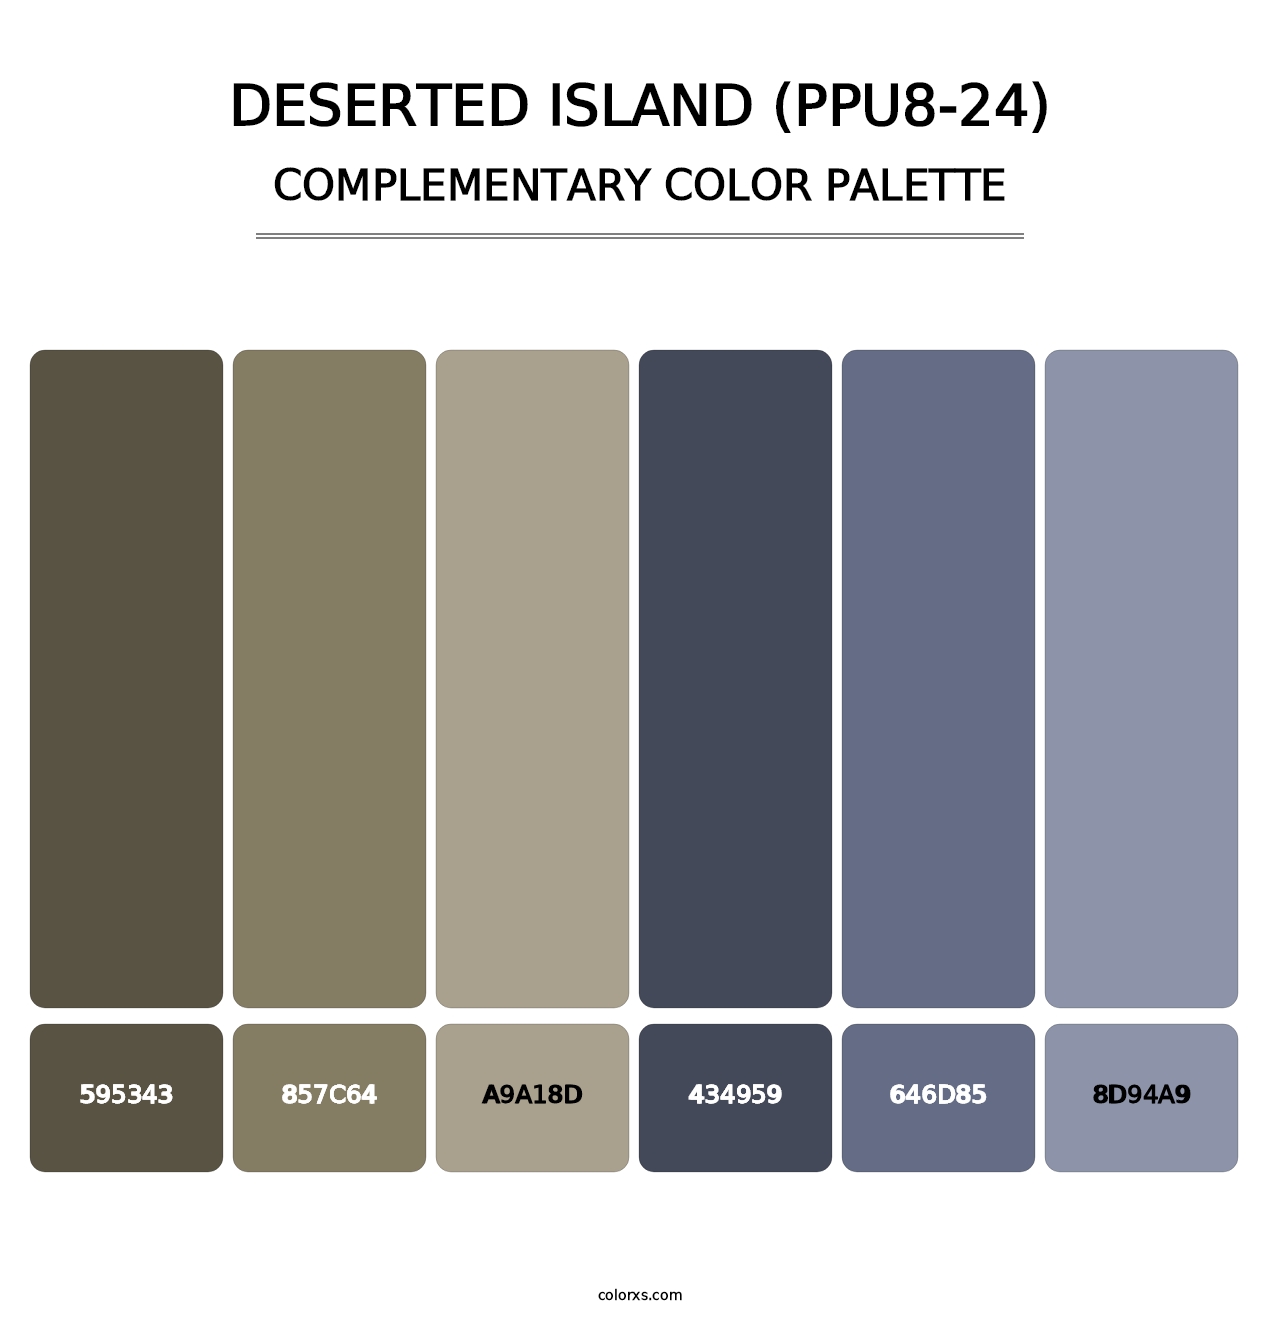 Deserted Island (PPU8-24) - Complementary Color Palette